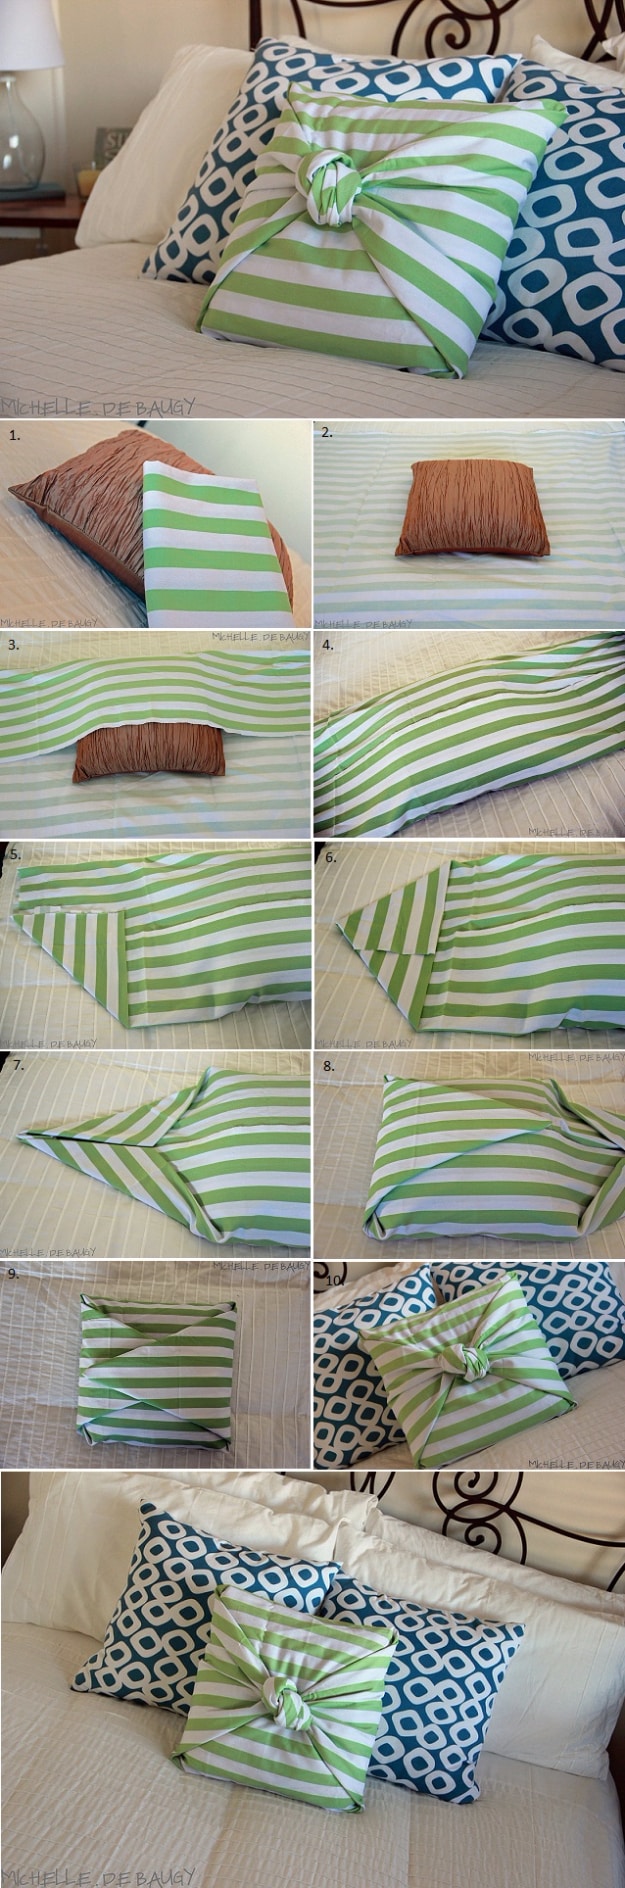 DIY Pillowcases - No Sew Pillow Case GÇô DIY - Easy Sewing Projects for Pillows - Bedroom and Home Decor Ideas - Sewing Patterns and Tutorials - No Sew Ideas - DIY Projects and Crafts for Women #sewing #diydecor #pillows 